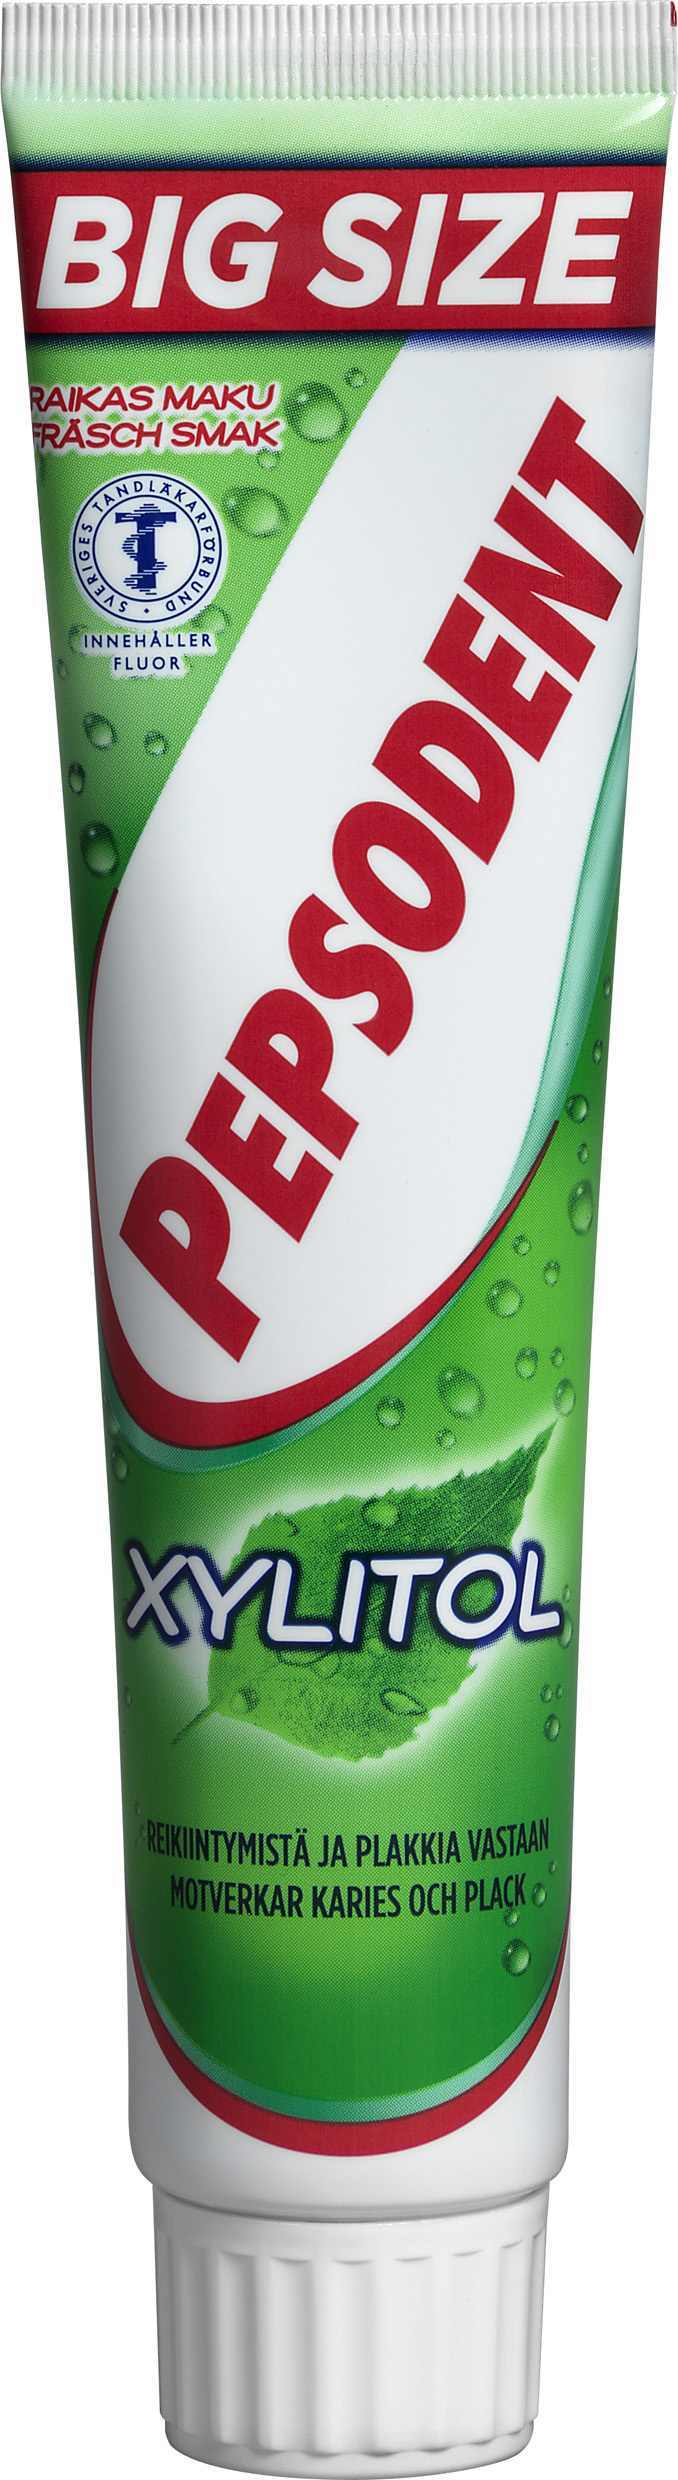 Pepsodent Xylitol 125ml